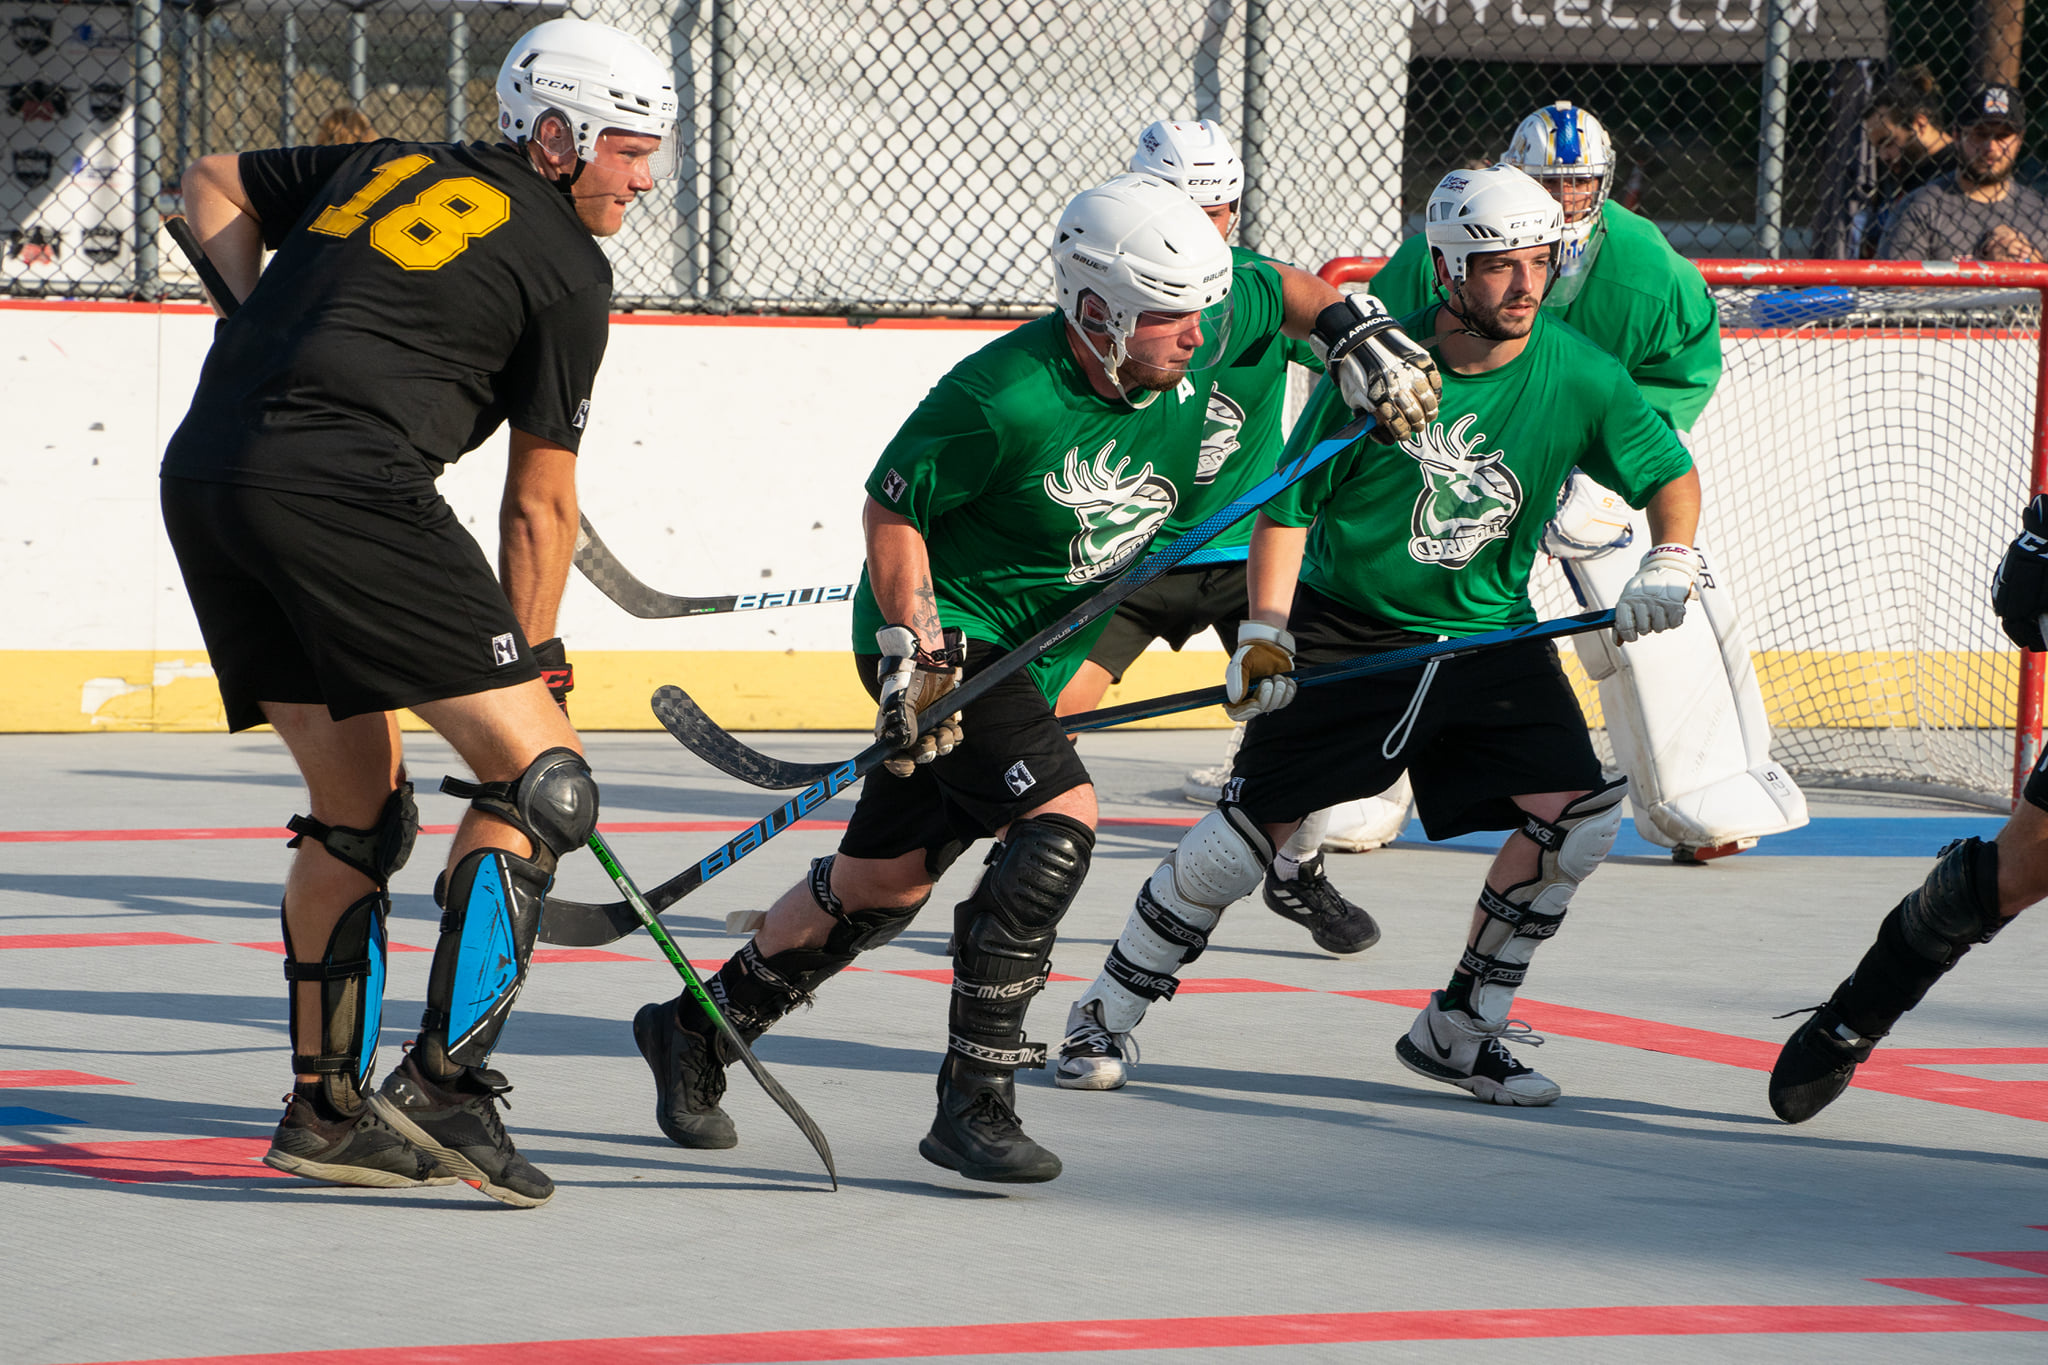 Ball Hockey: National Ball Hockey League, United States, Ten Players and Two Goalies, Sports equipment. 2050x1370 HD Background.